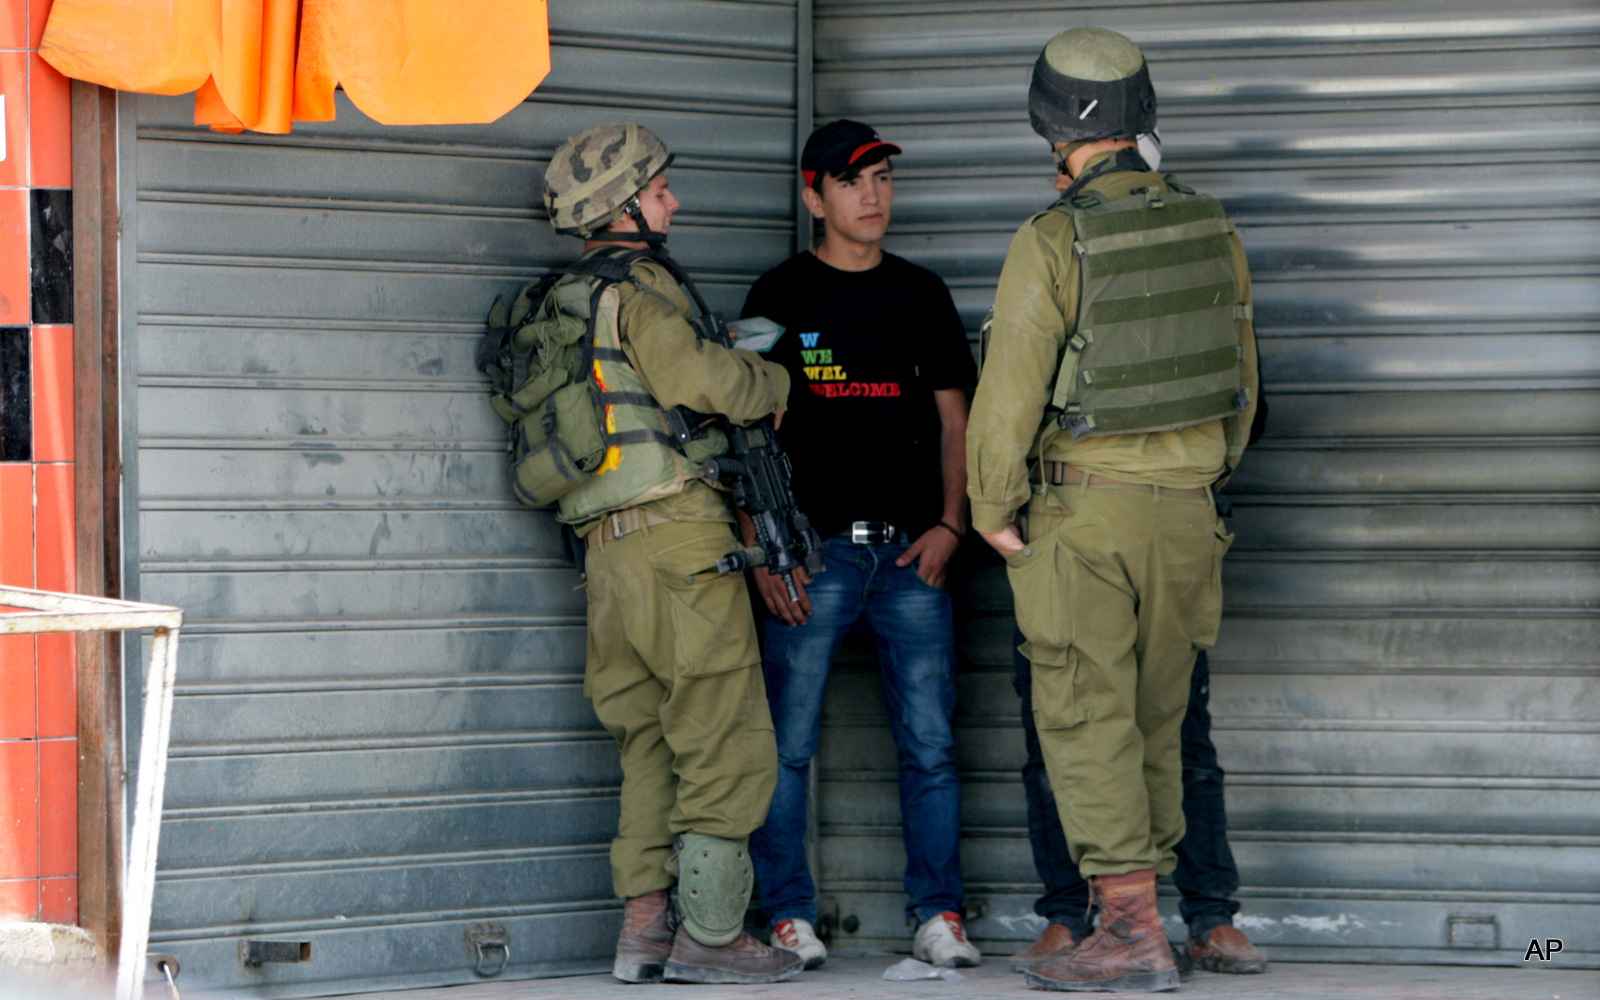 Israeli soldiers check the IDs of Palestinians near an Israeli checkpoint near Nablus, in the Israeli occupied West Bank, Tuesday, June 3, 2014.